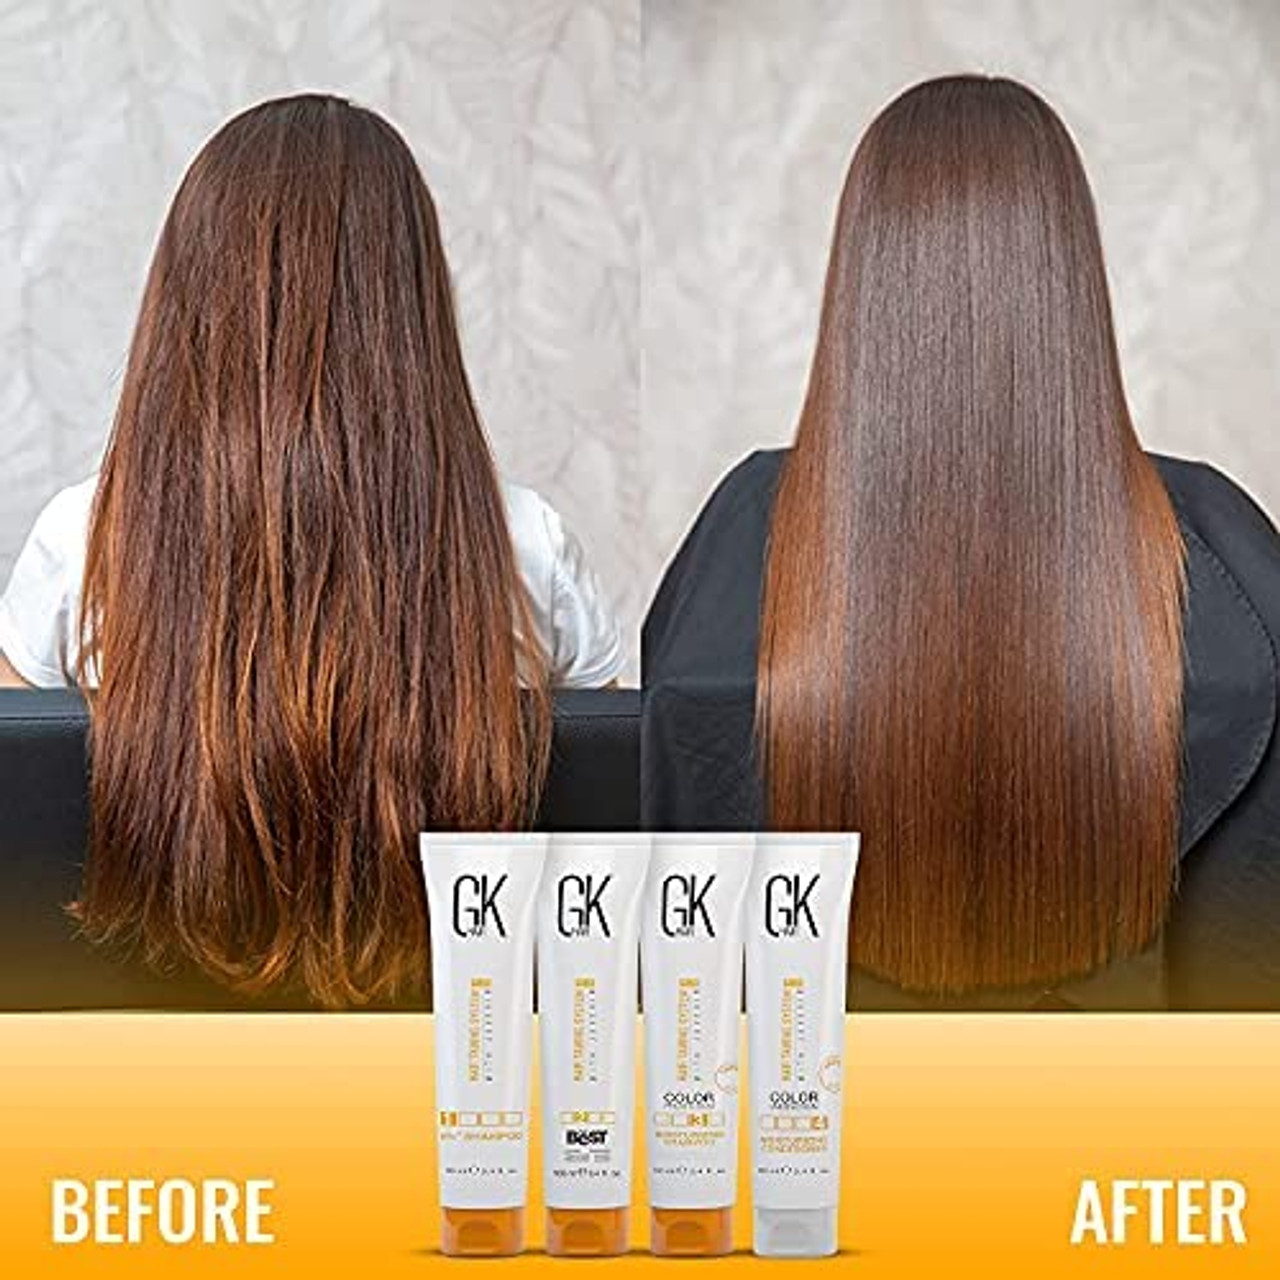 Gk Hair Taming System With Juvexin Serum 50ml At Best Price